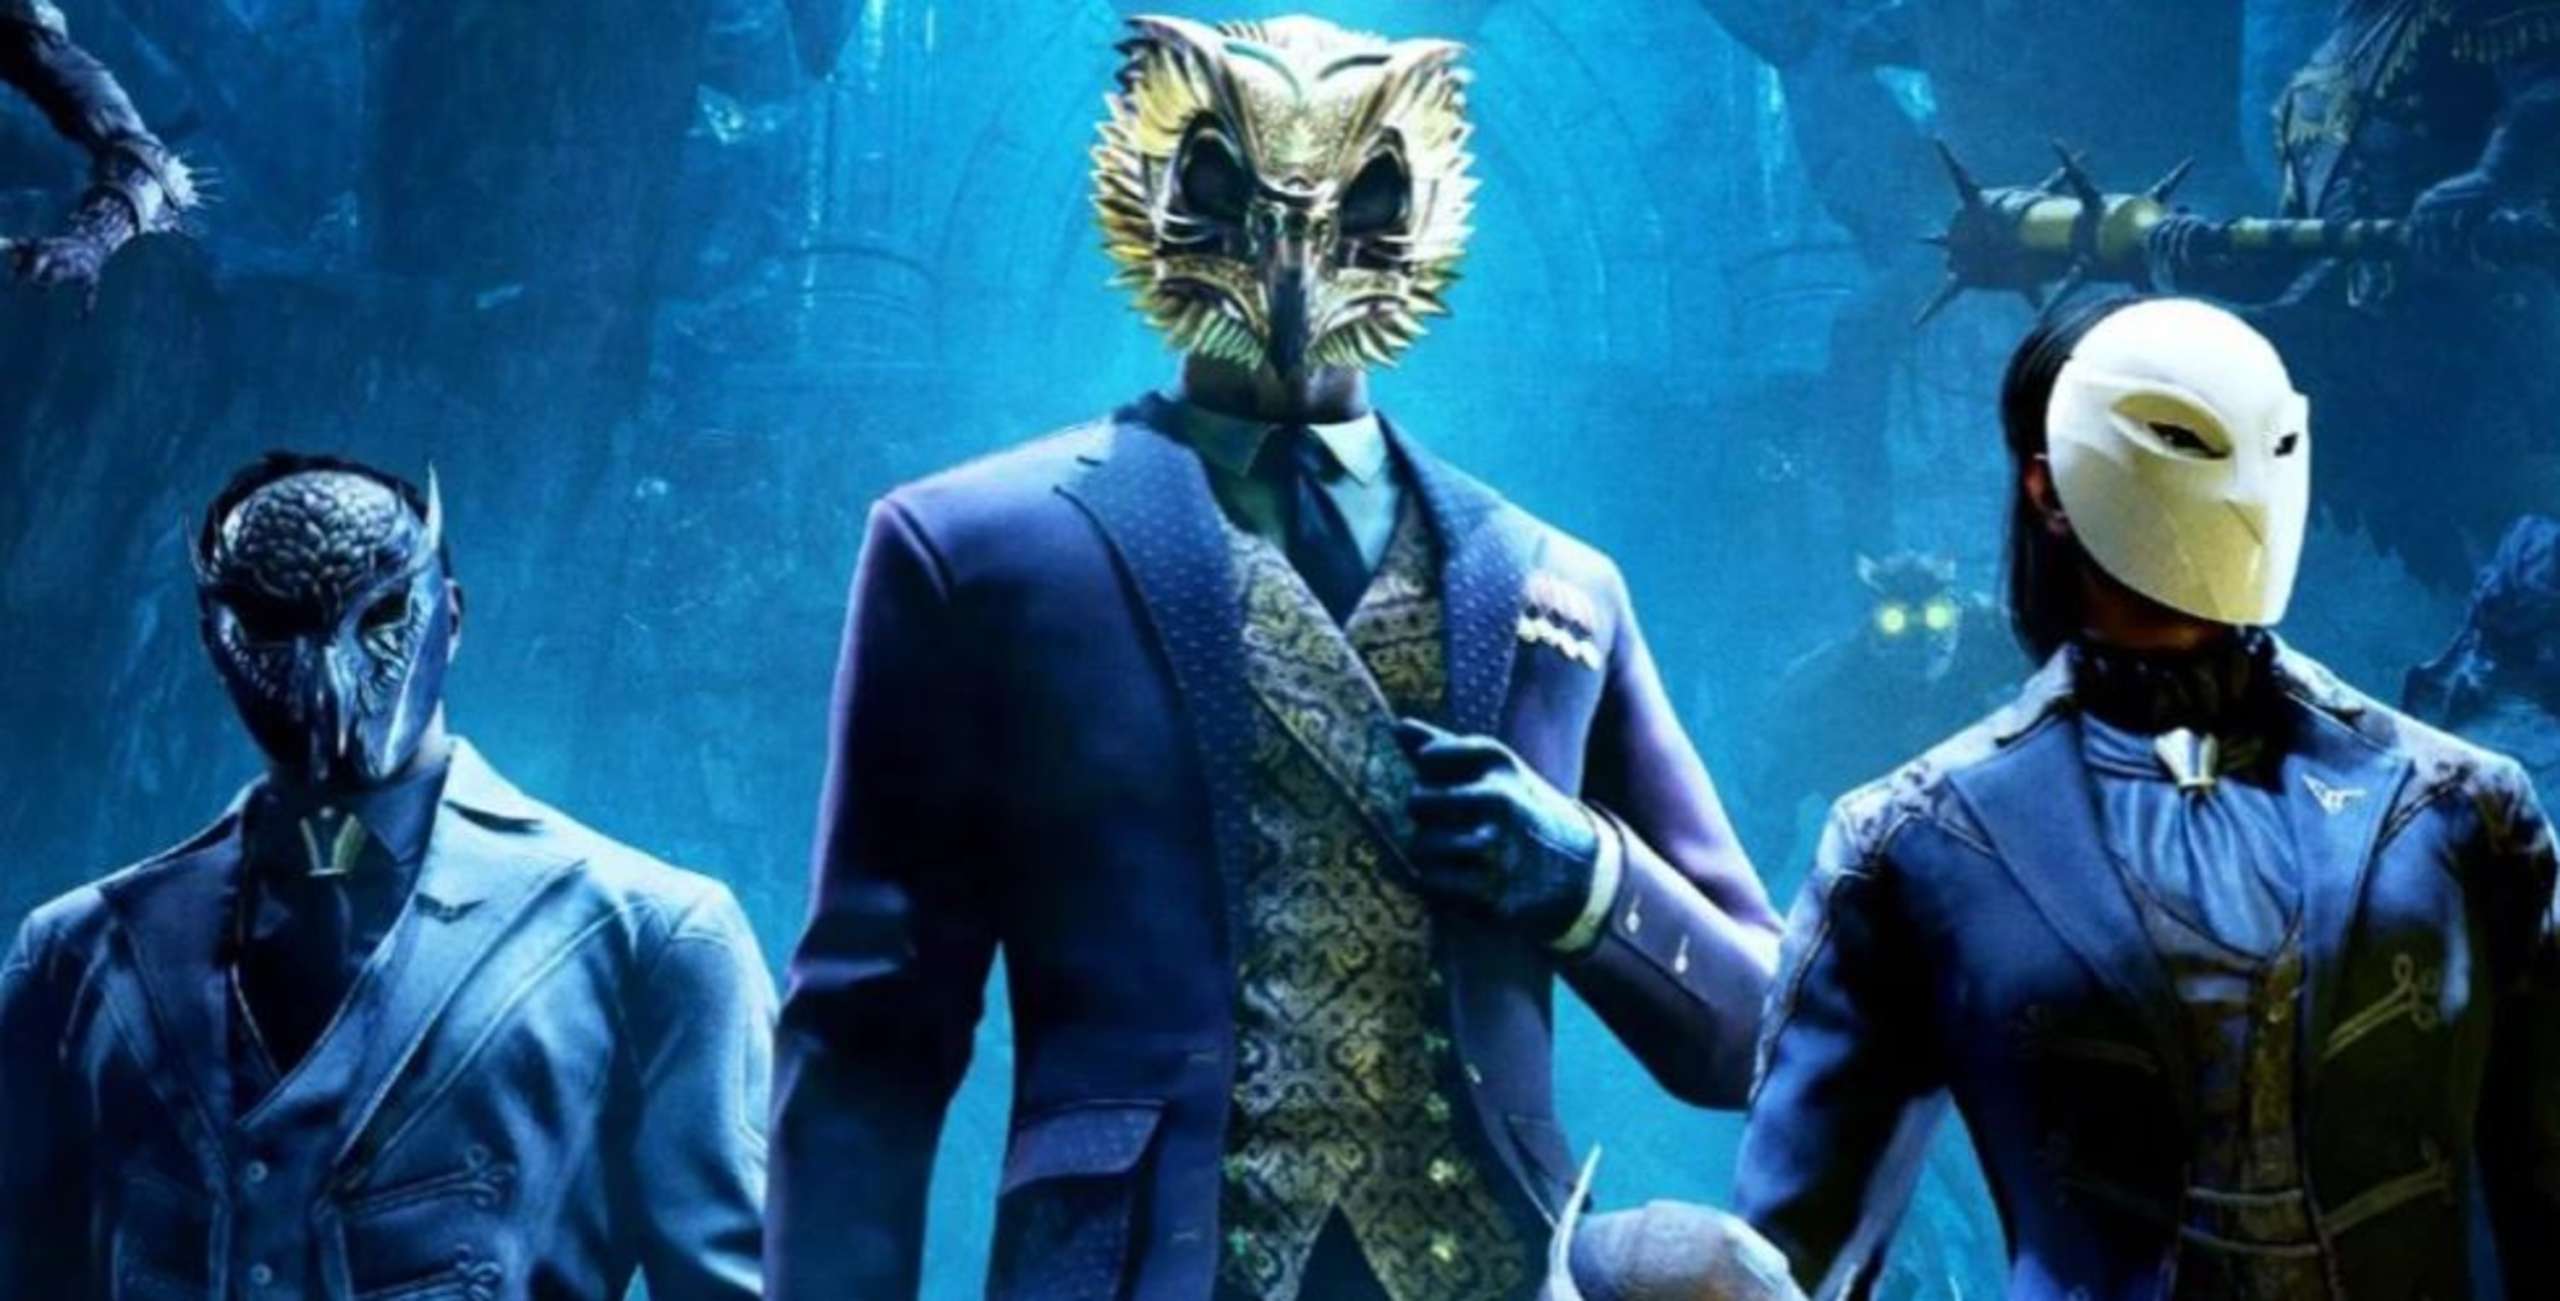 This Amazing Gotham Knights Fan’s Costume As An Essential Member Of The Deadly Court Of Owls Proves That Villainy And Flare Can Go Hand In Hand